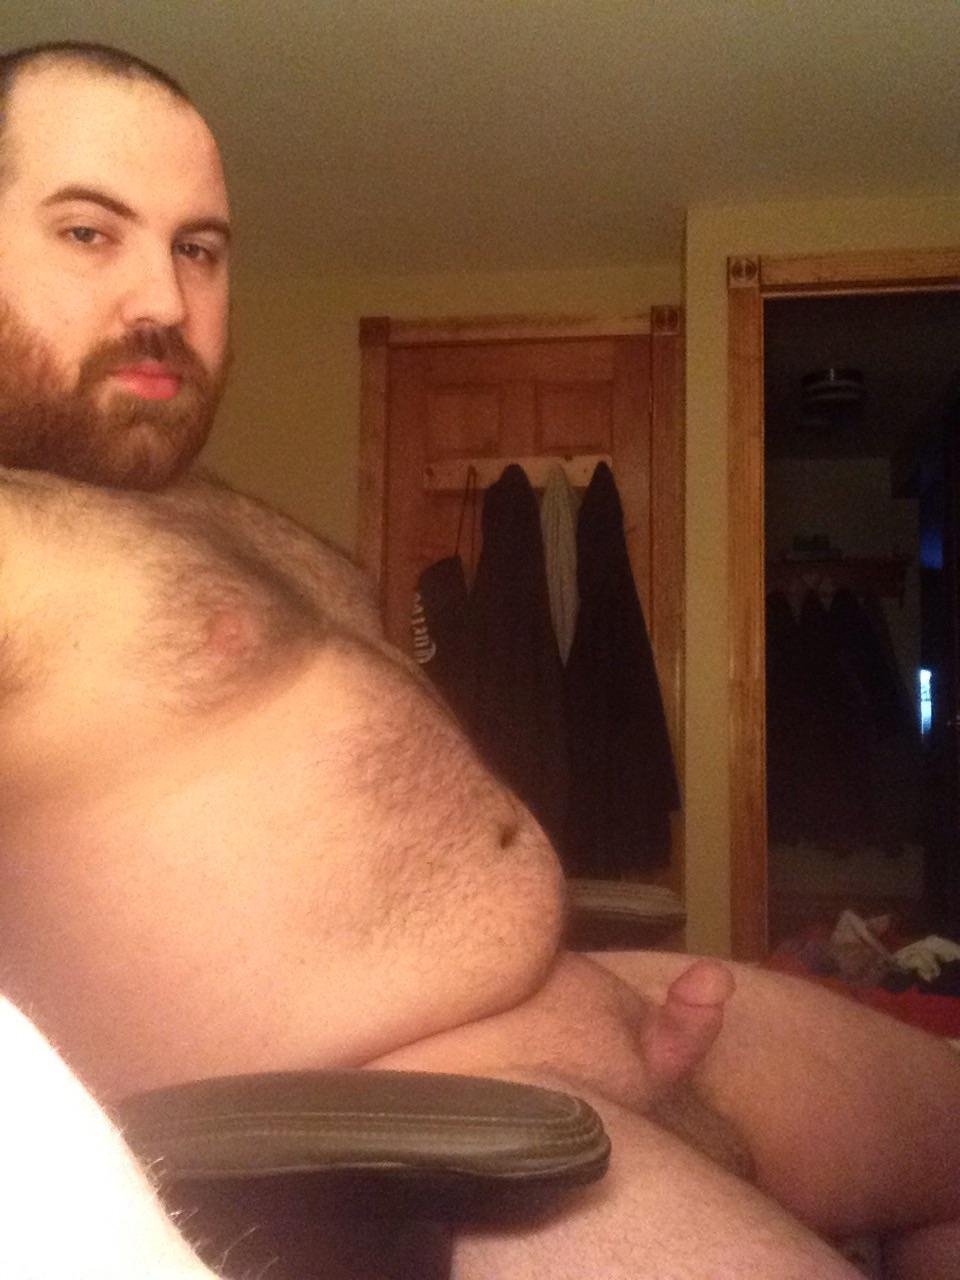 Would you suck my small cock?